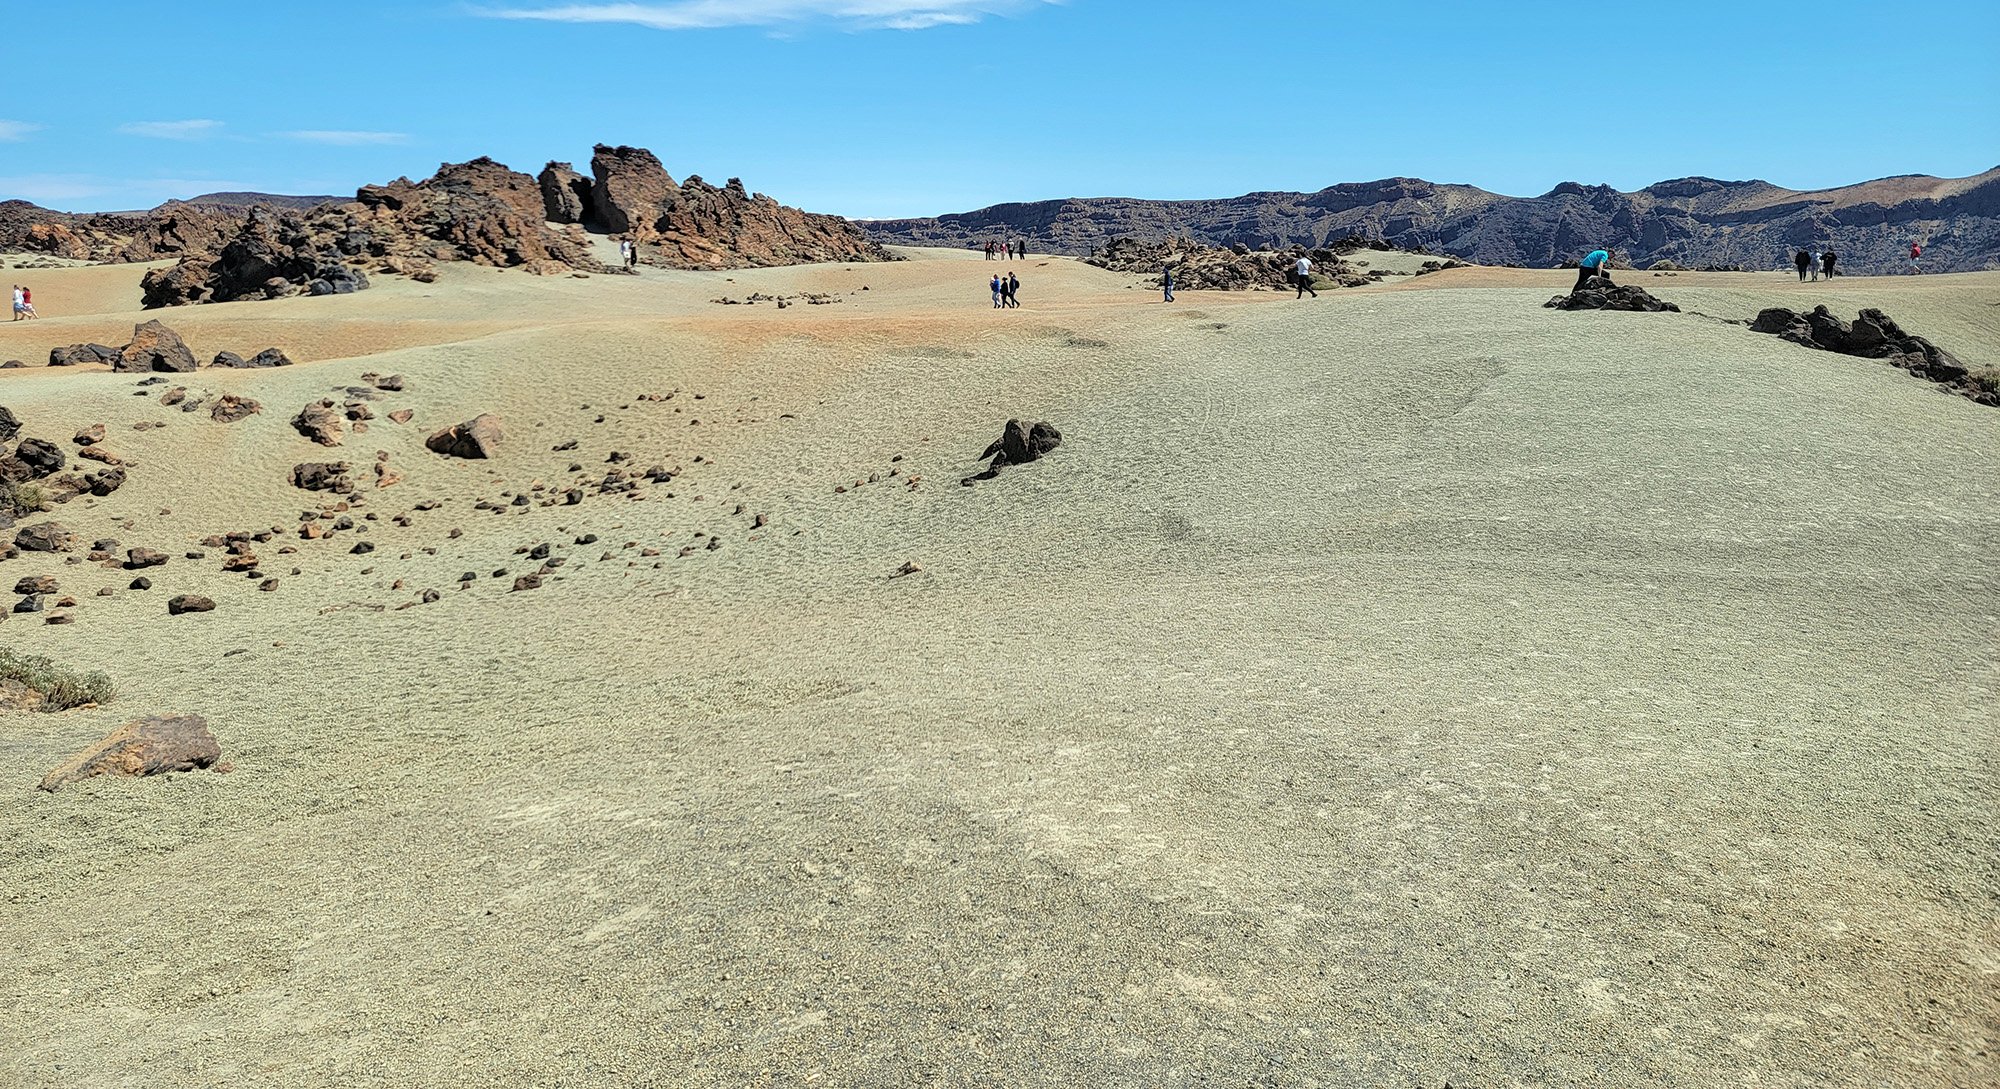 More of the arid desert landscape. I don't think there's anything quite like this on the rest of the Island.